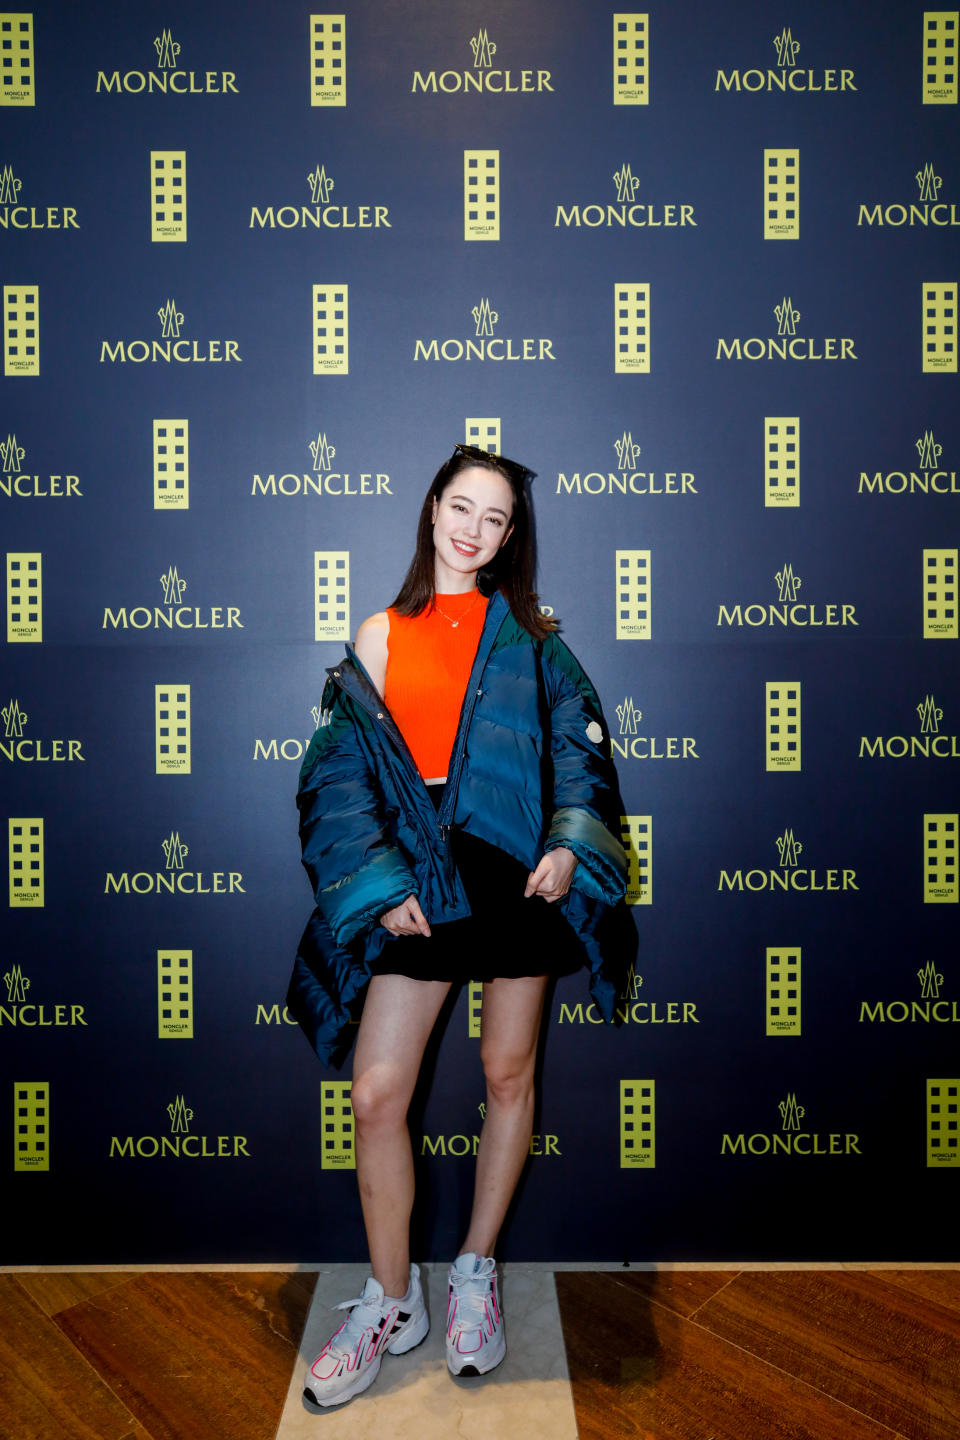 Fiona Fussi at Moncler Launch. (PHOTO: Moncler)